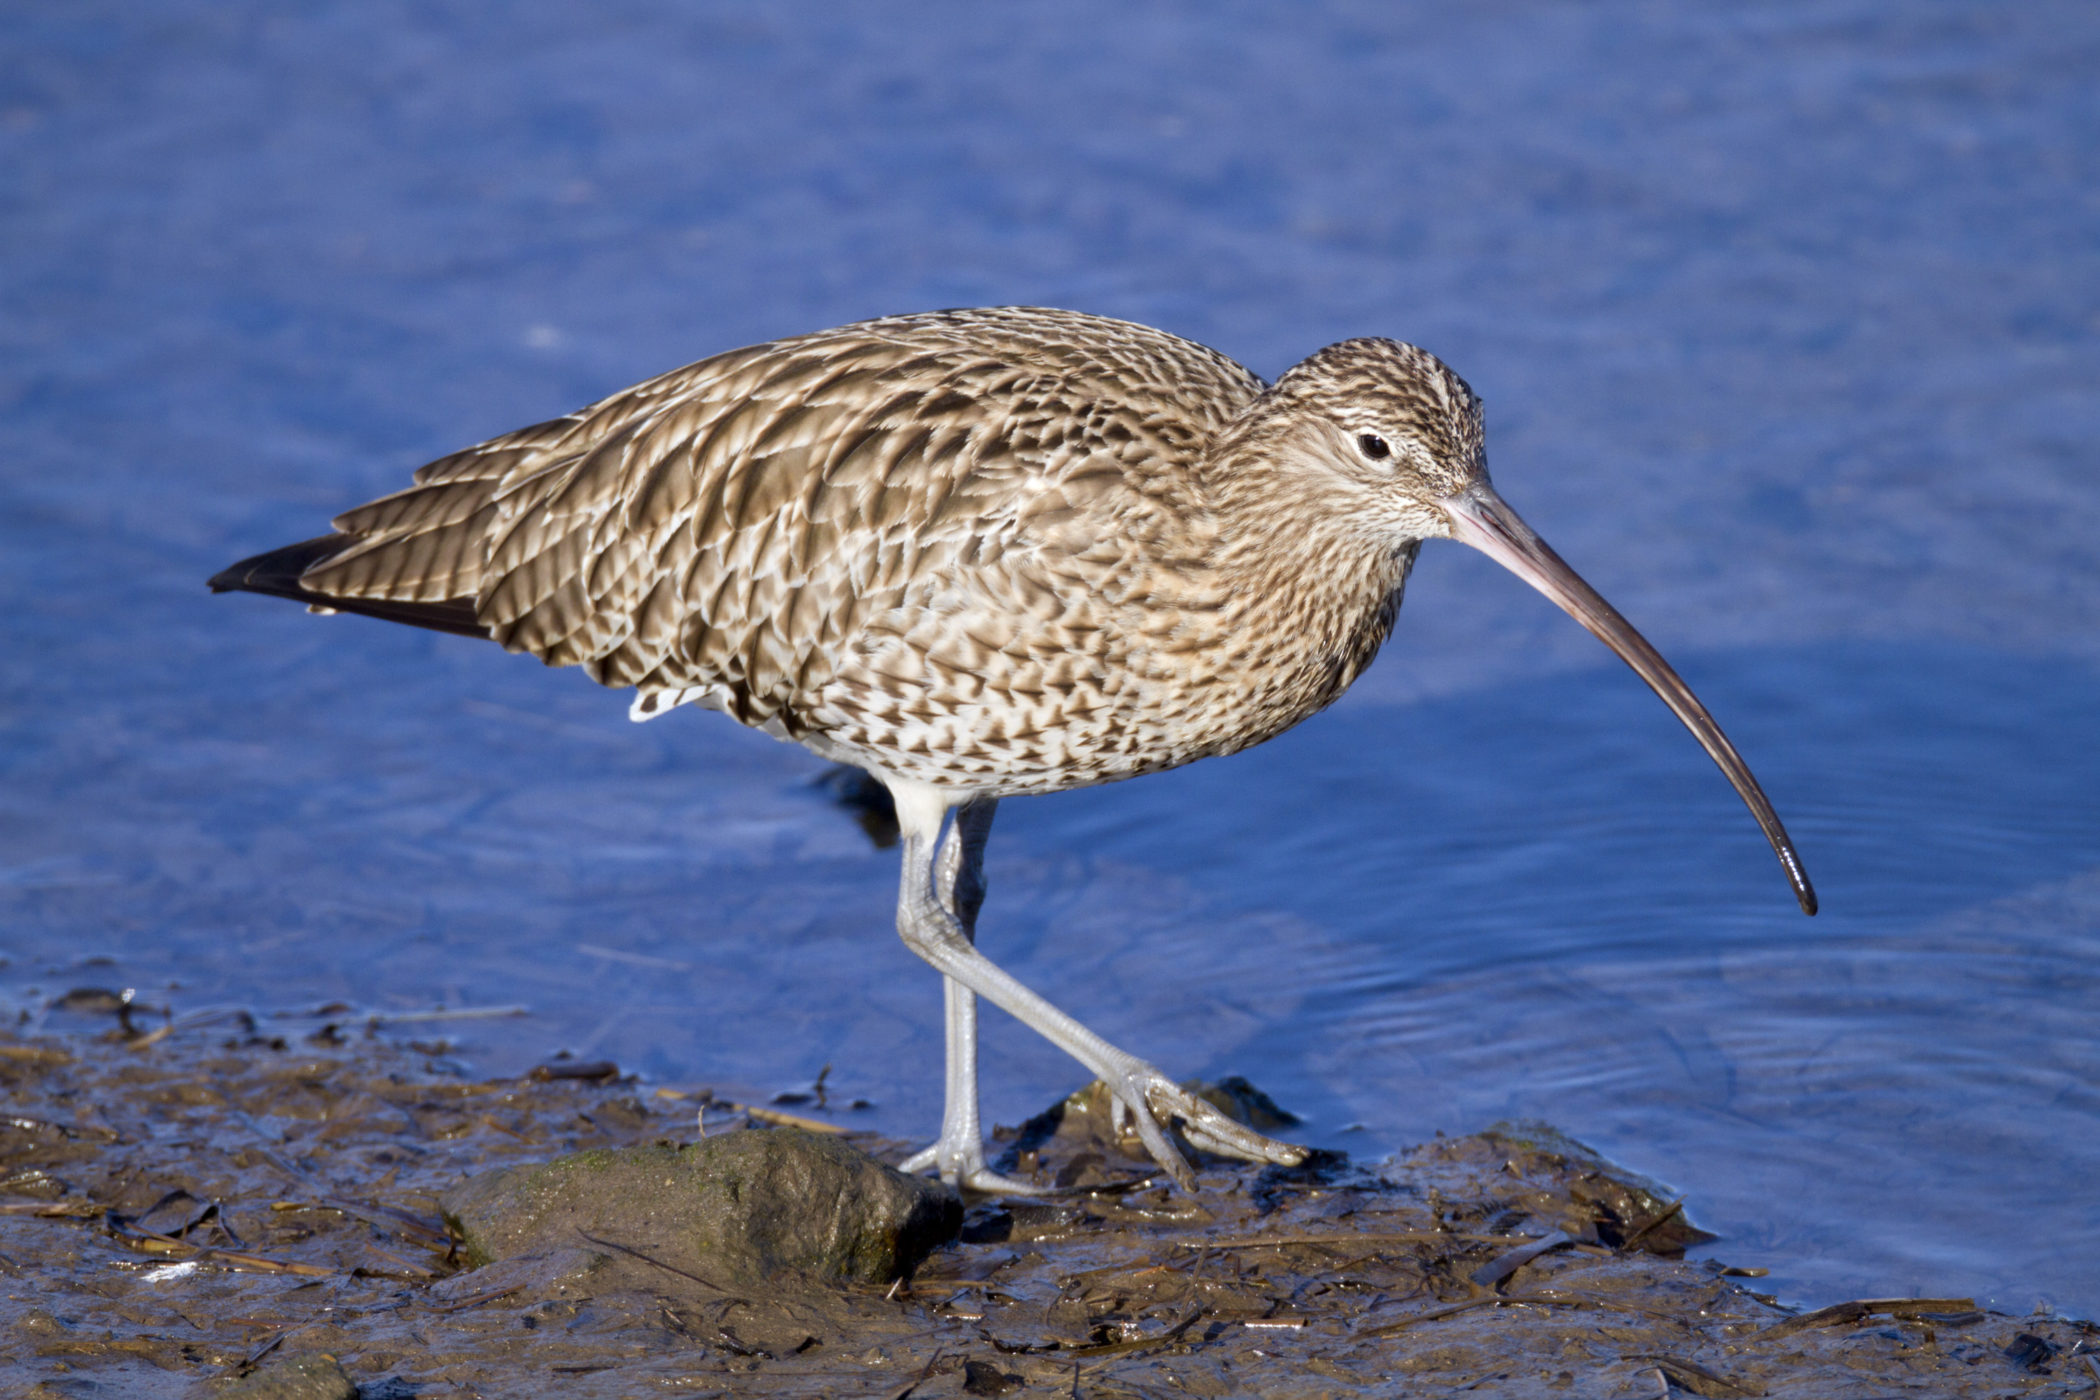 The curlew is a common wading bird at Hayle, notice its long down-curved beak. Credit: David Chapman